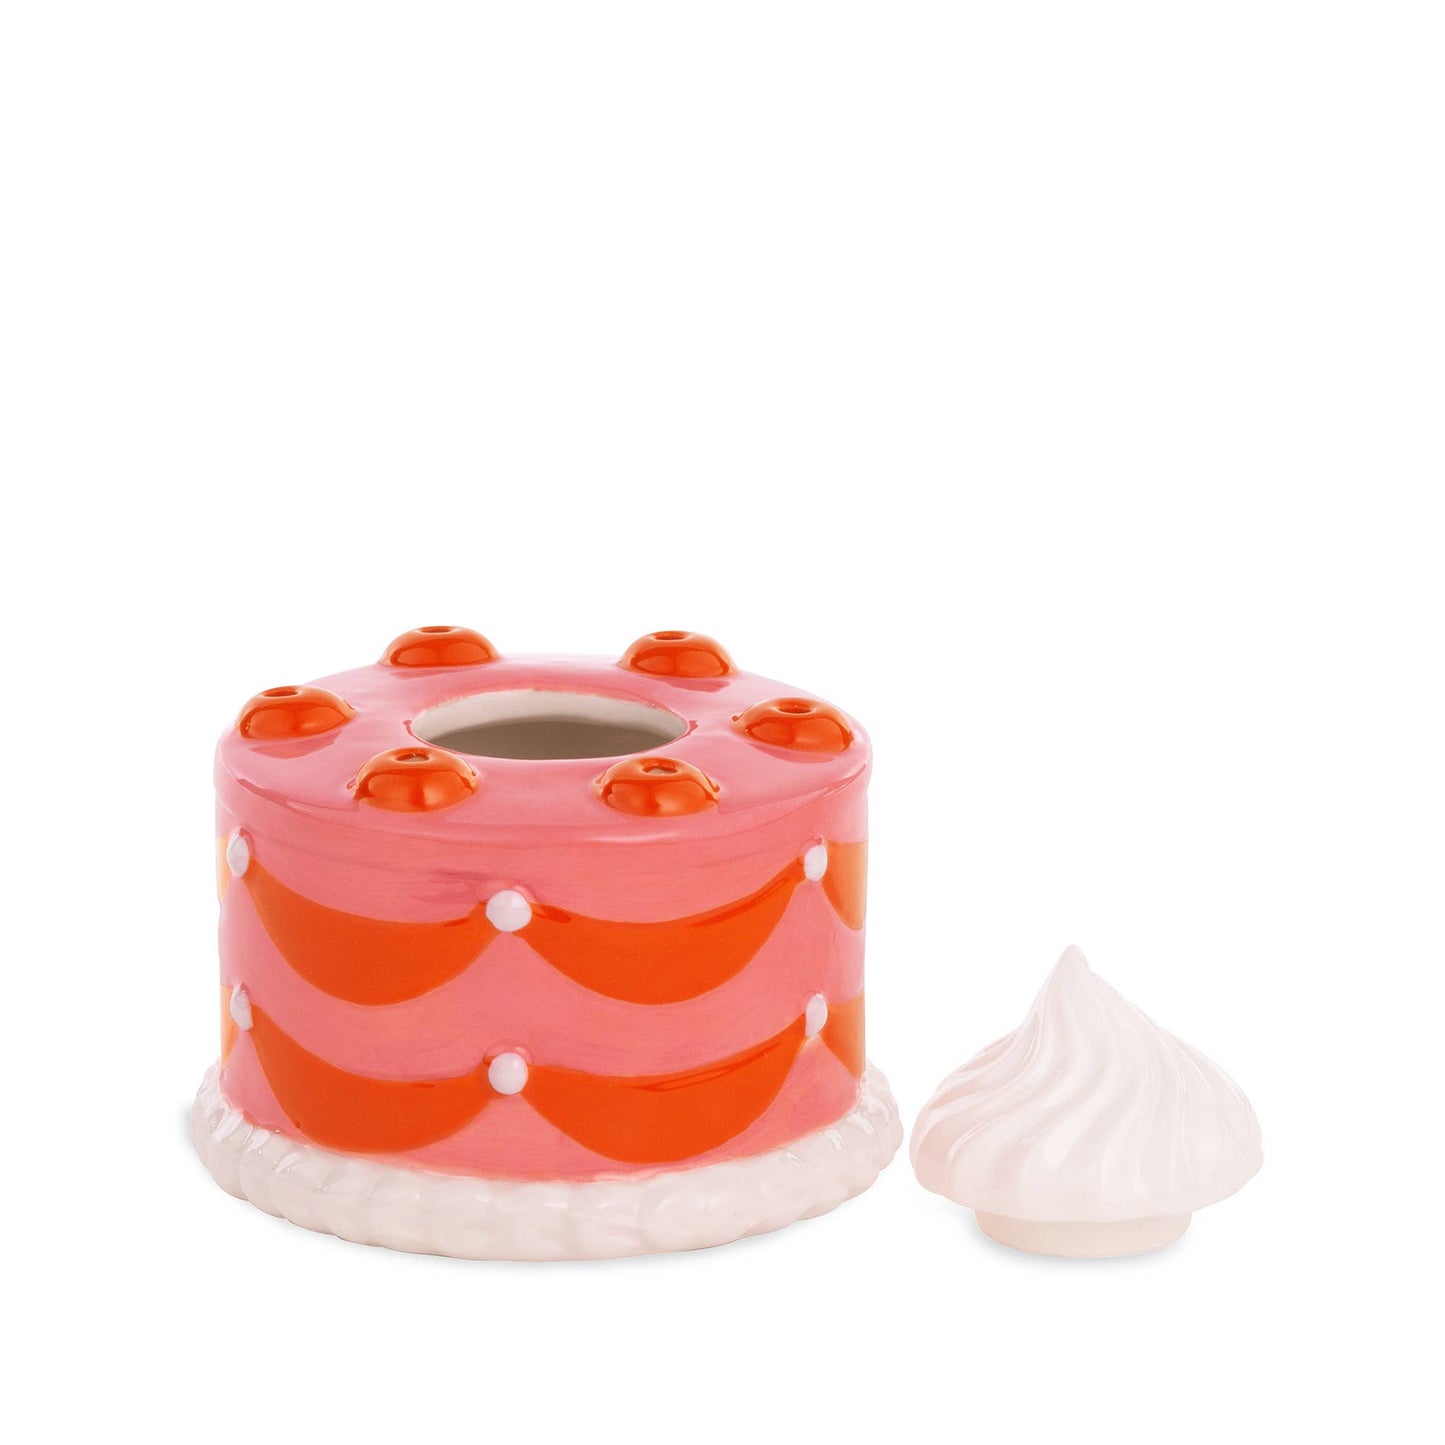 Ceramic cake match holder and striker --shaped like a whole, round cake and painted red and pink. Has a dollop of whipped cream on top that is a removable lid, covering space to house matches 